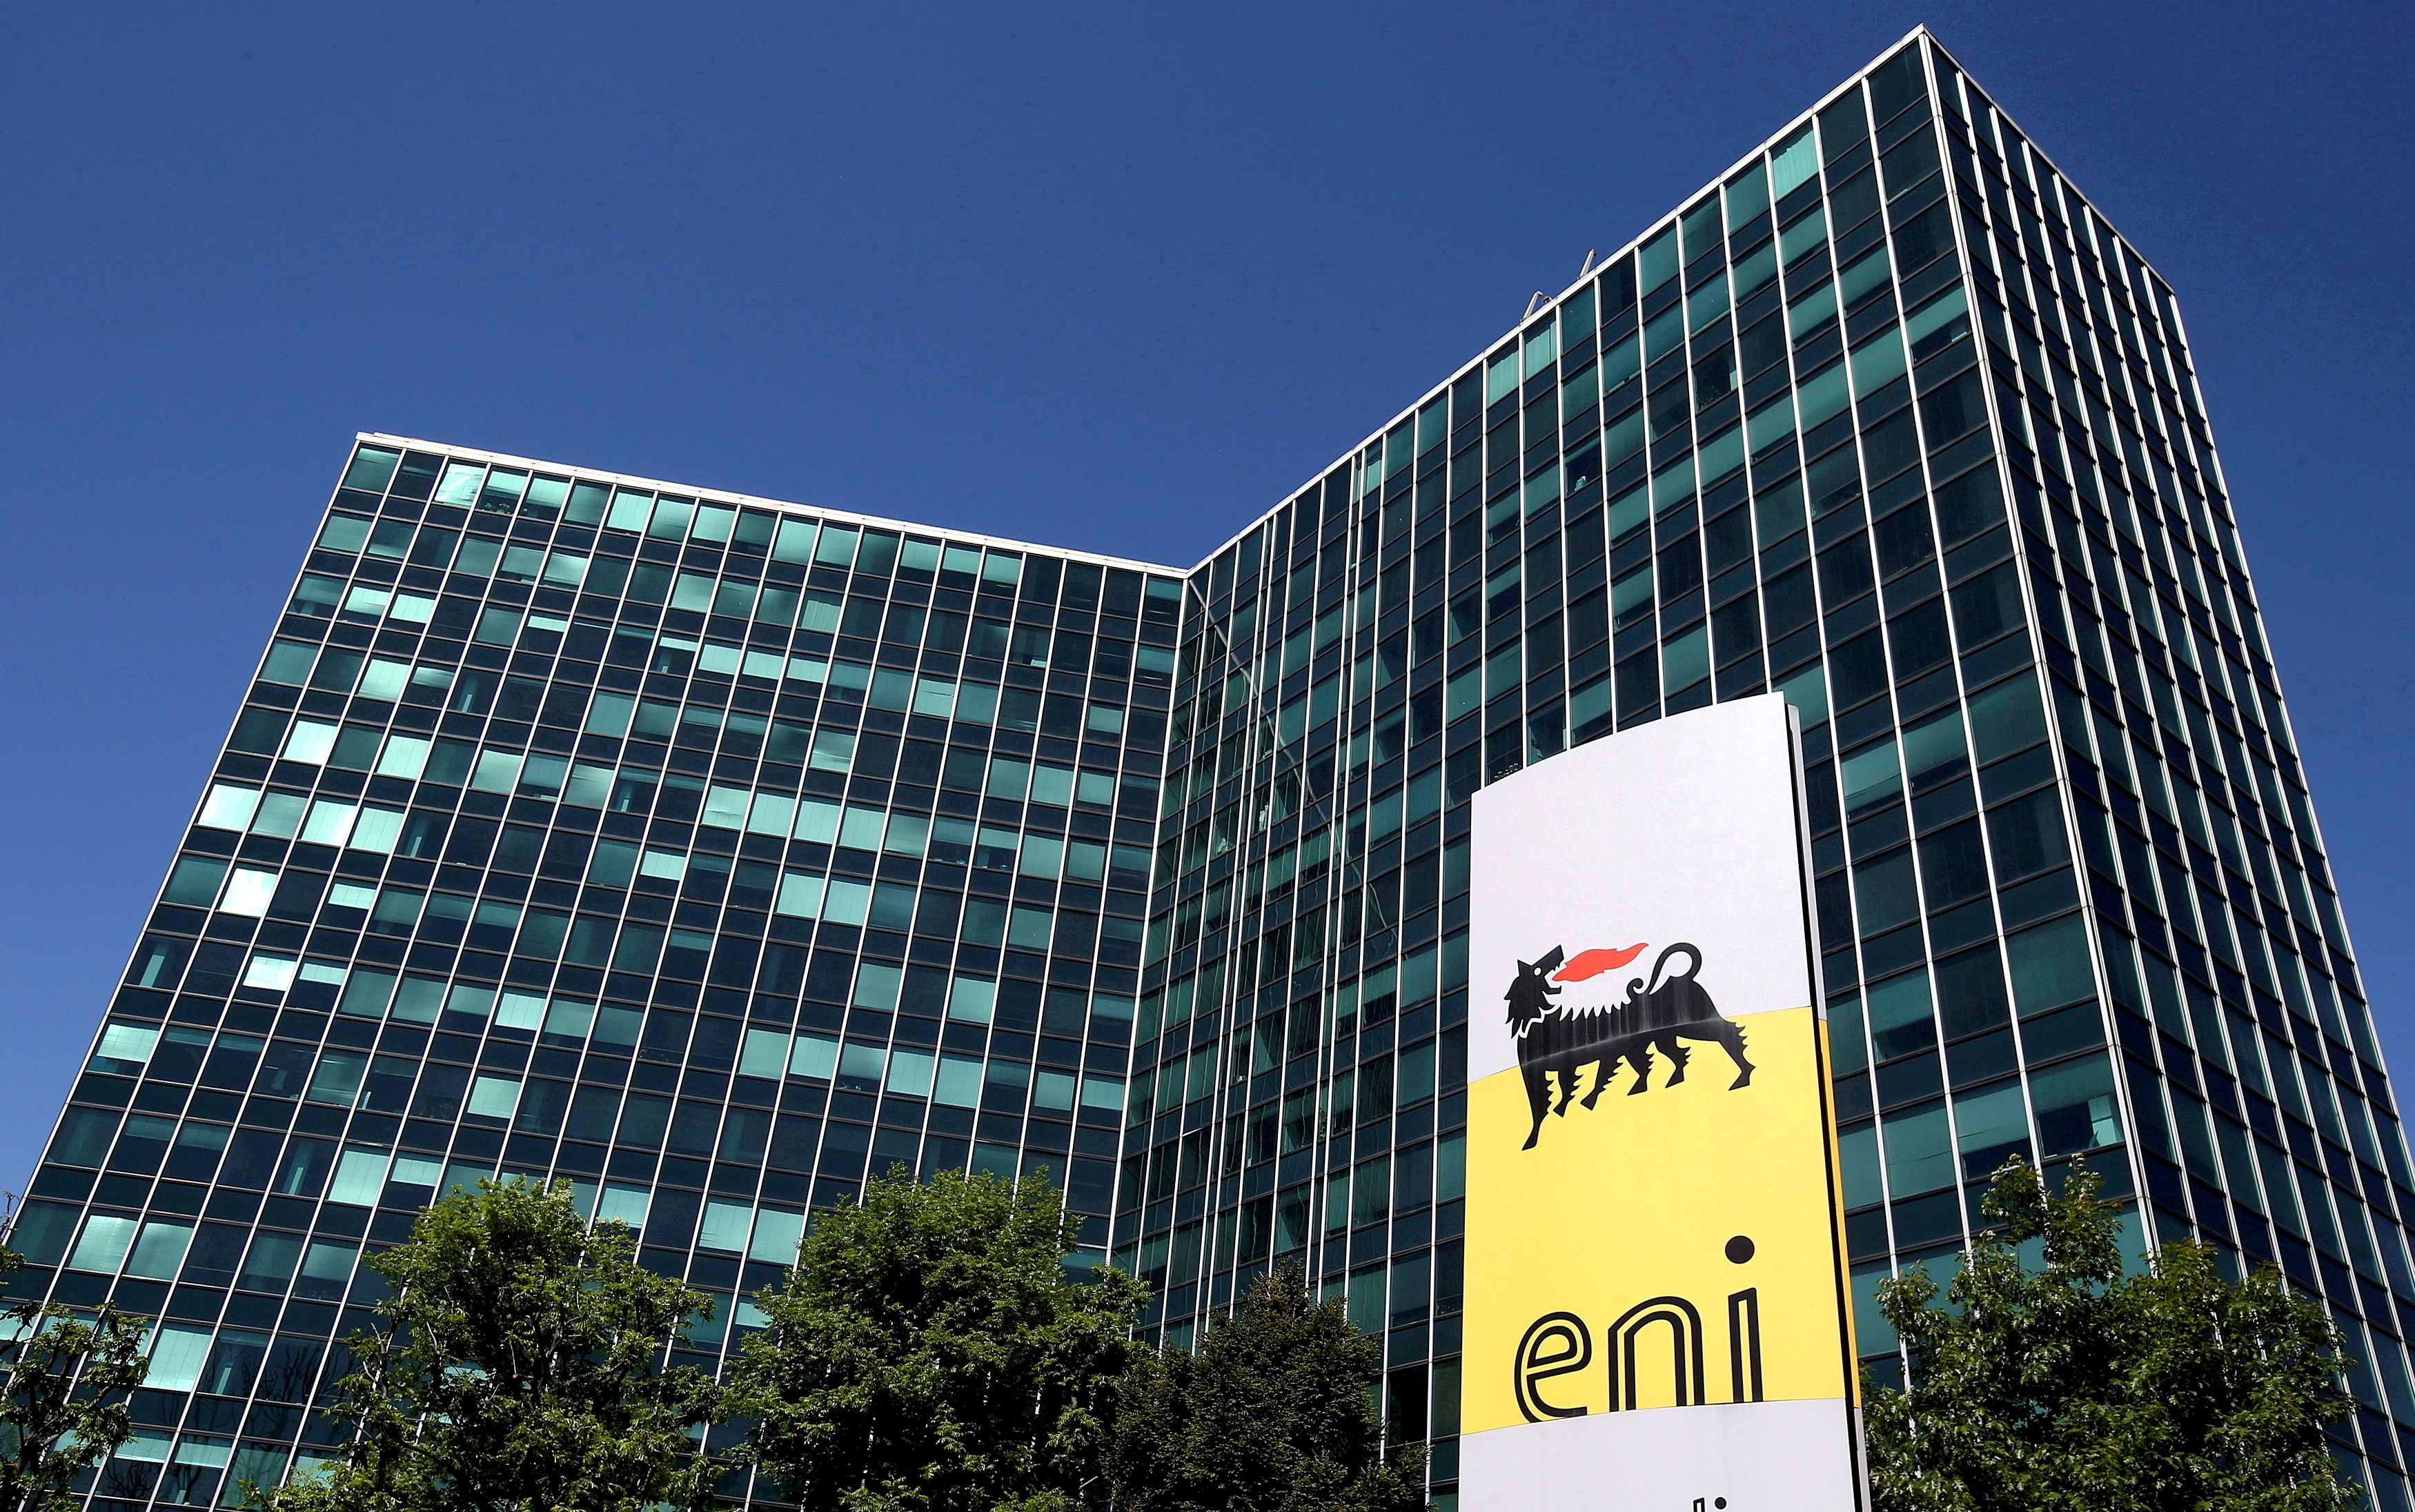 Eni's logo is seen in front of its headquarters in San Donato Milanese, near Milan, Italy, April 27, 2016.  REUTERS/Stefano Rellandini/File Photo